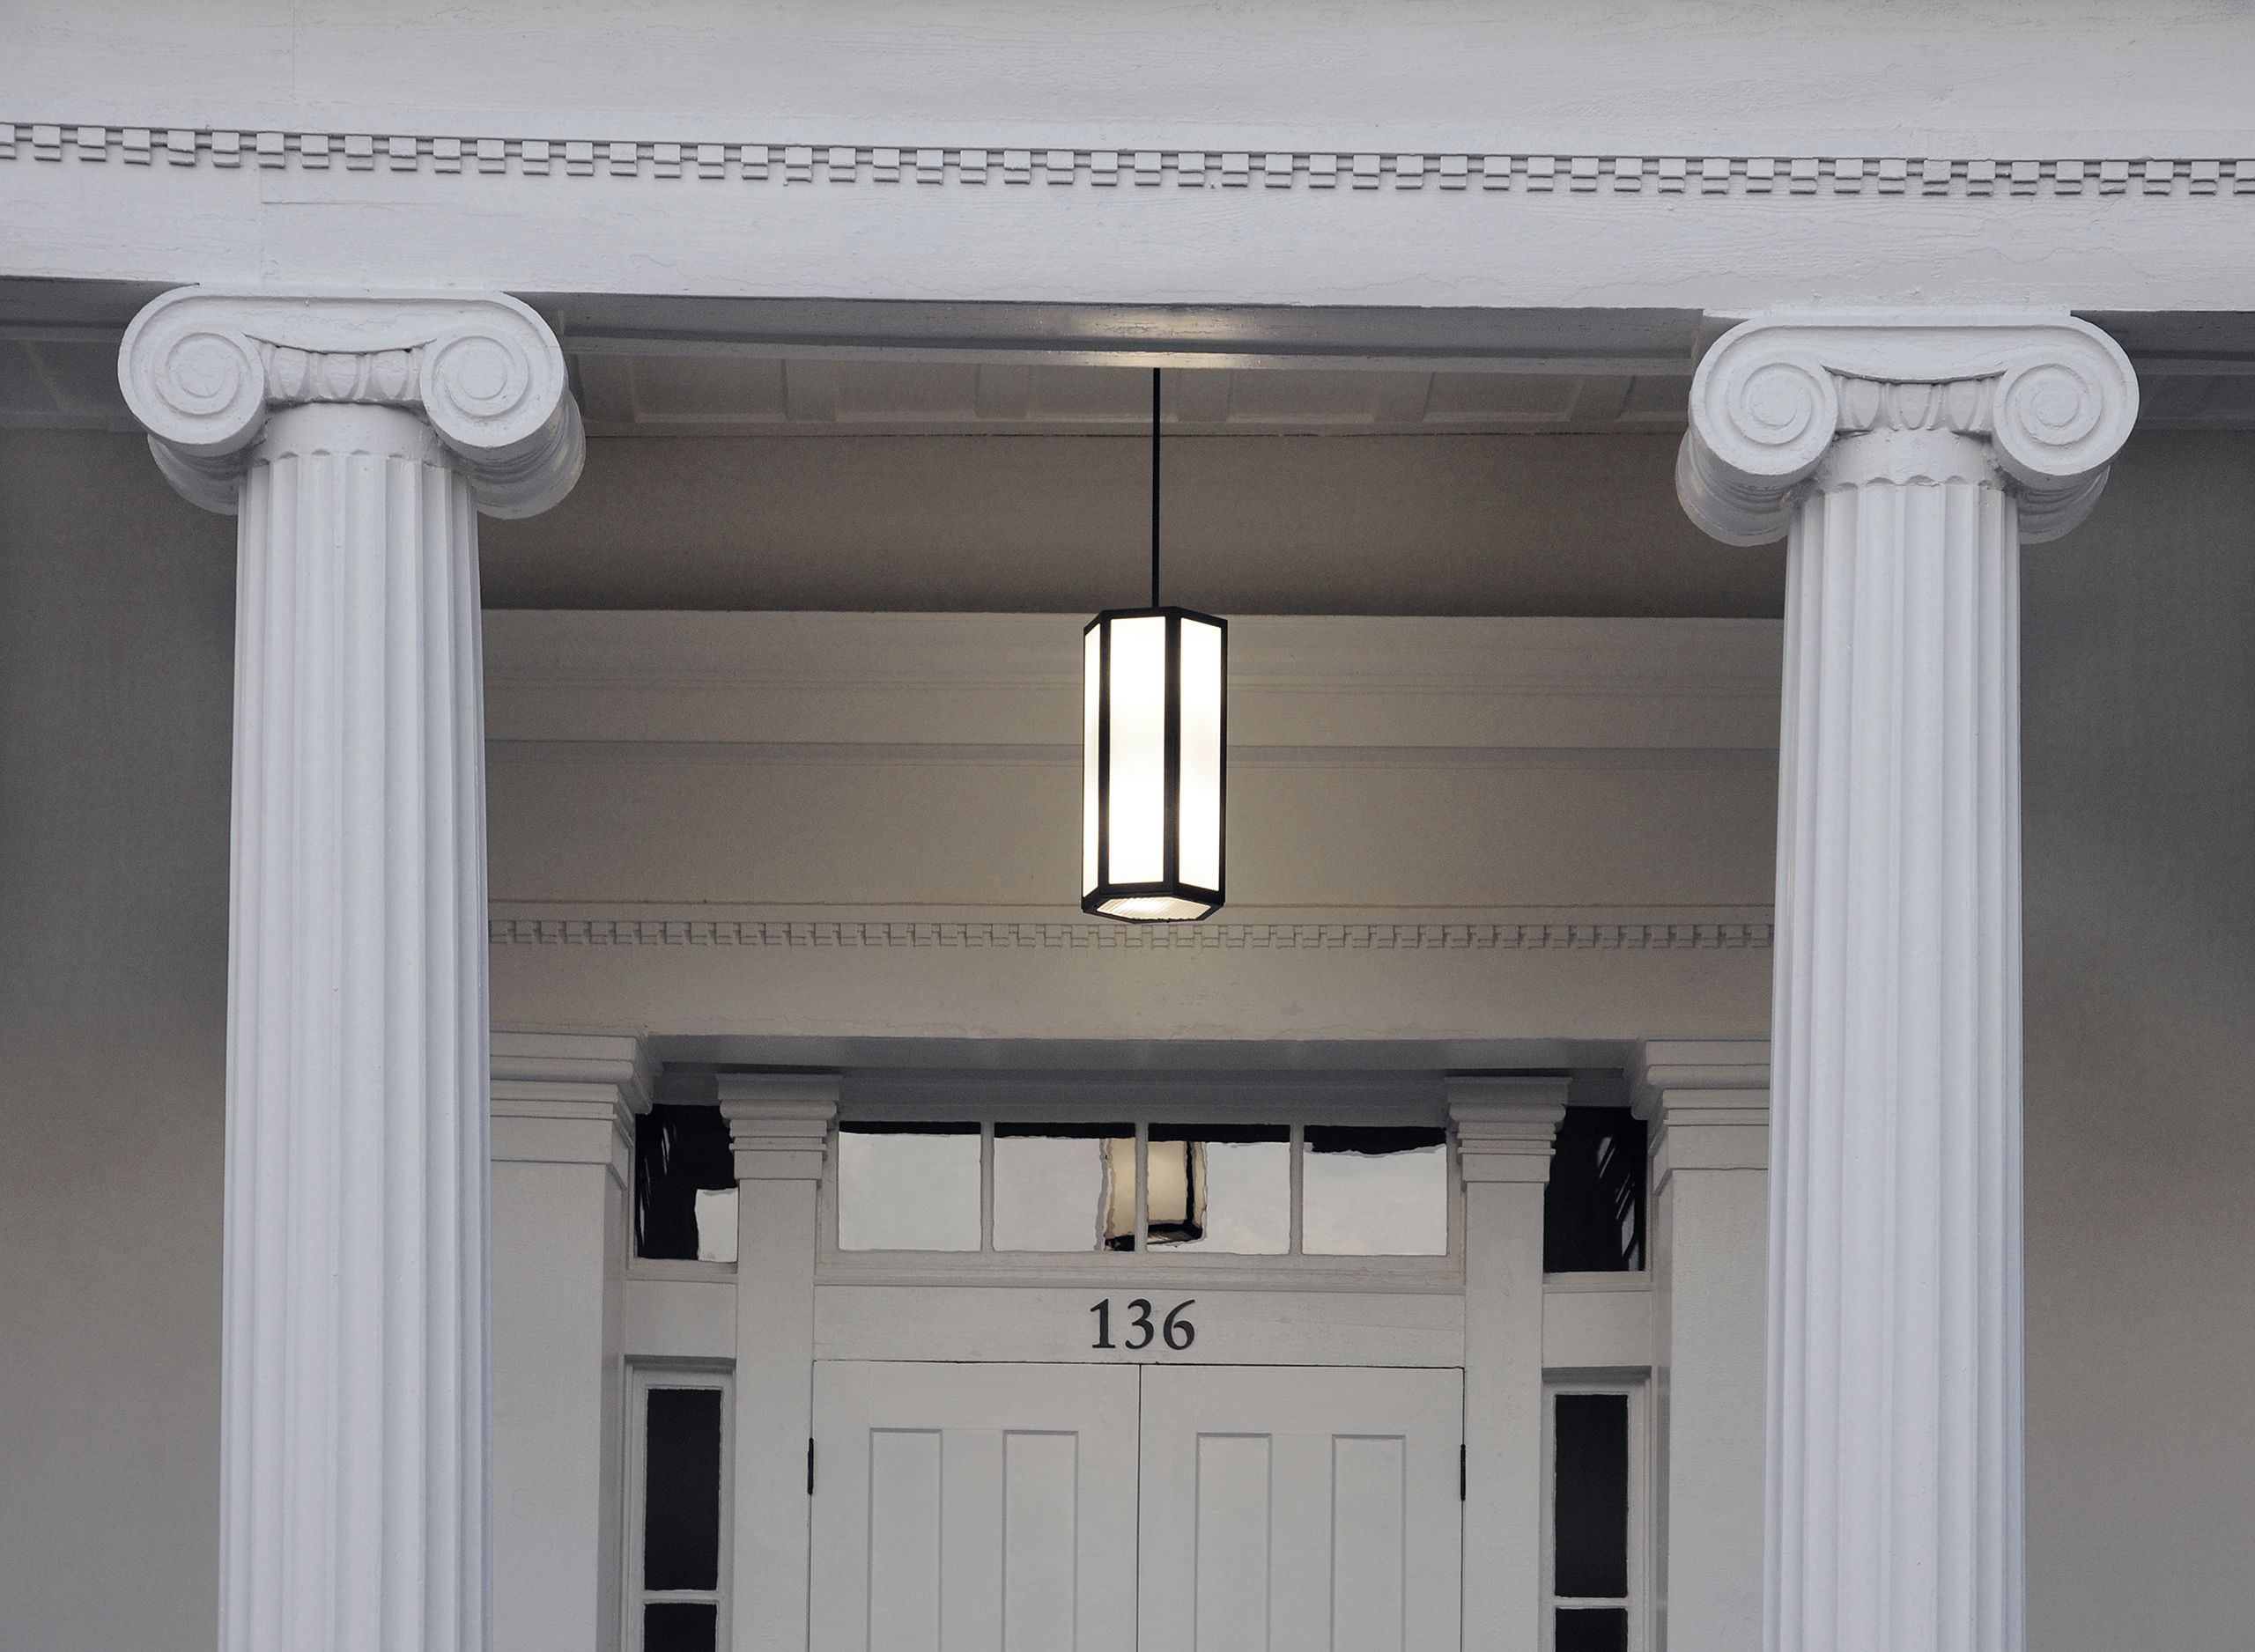 Phi Gamma Hall has a simple, temple-like exterior design, featuring a raised portico with two outer Doric columns and two intermediary Ionic columns. 